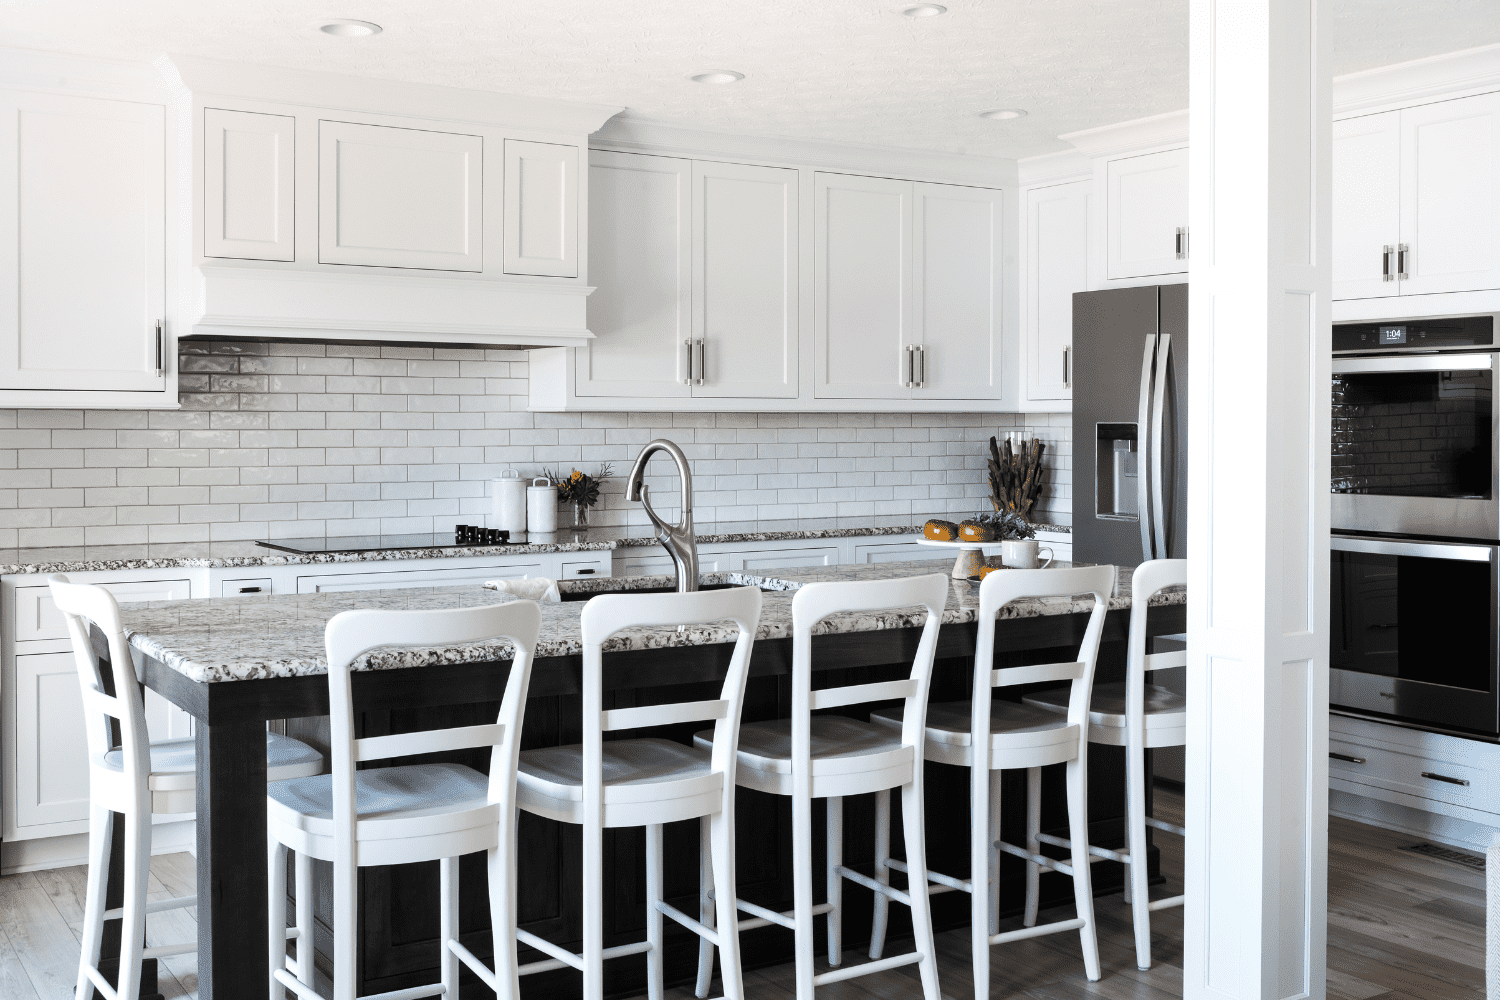 Nicholas Design Build | A kitchen with white cabinets and black stools.